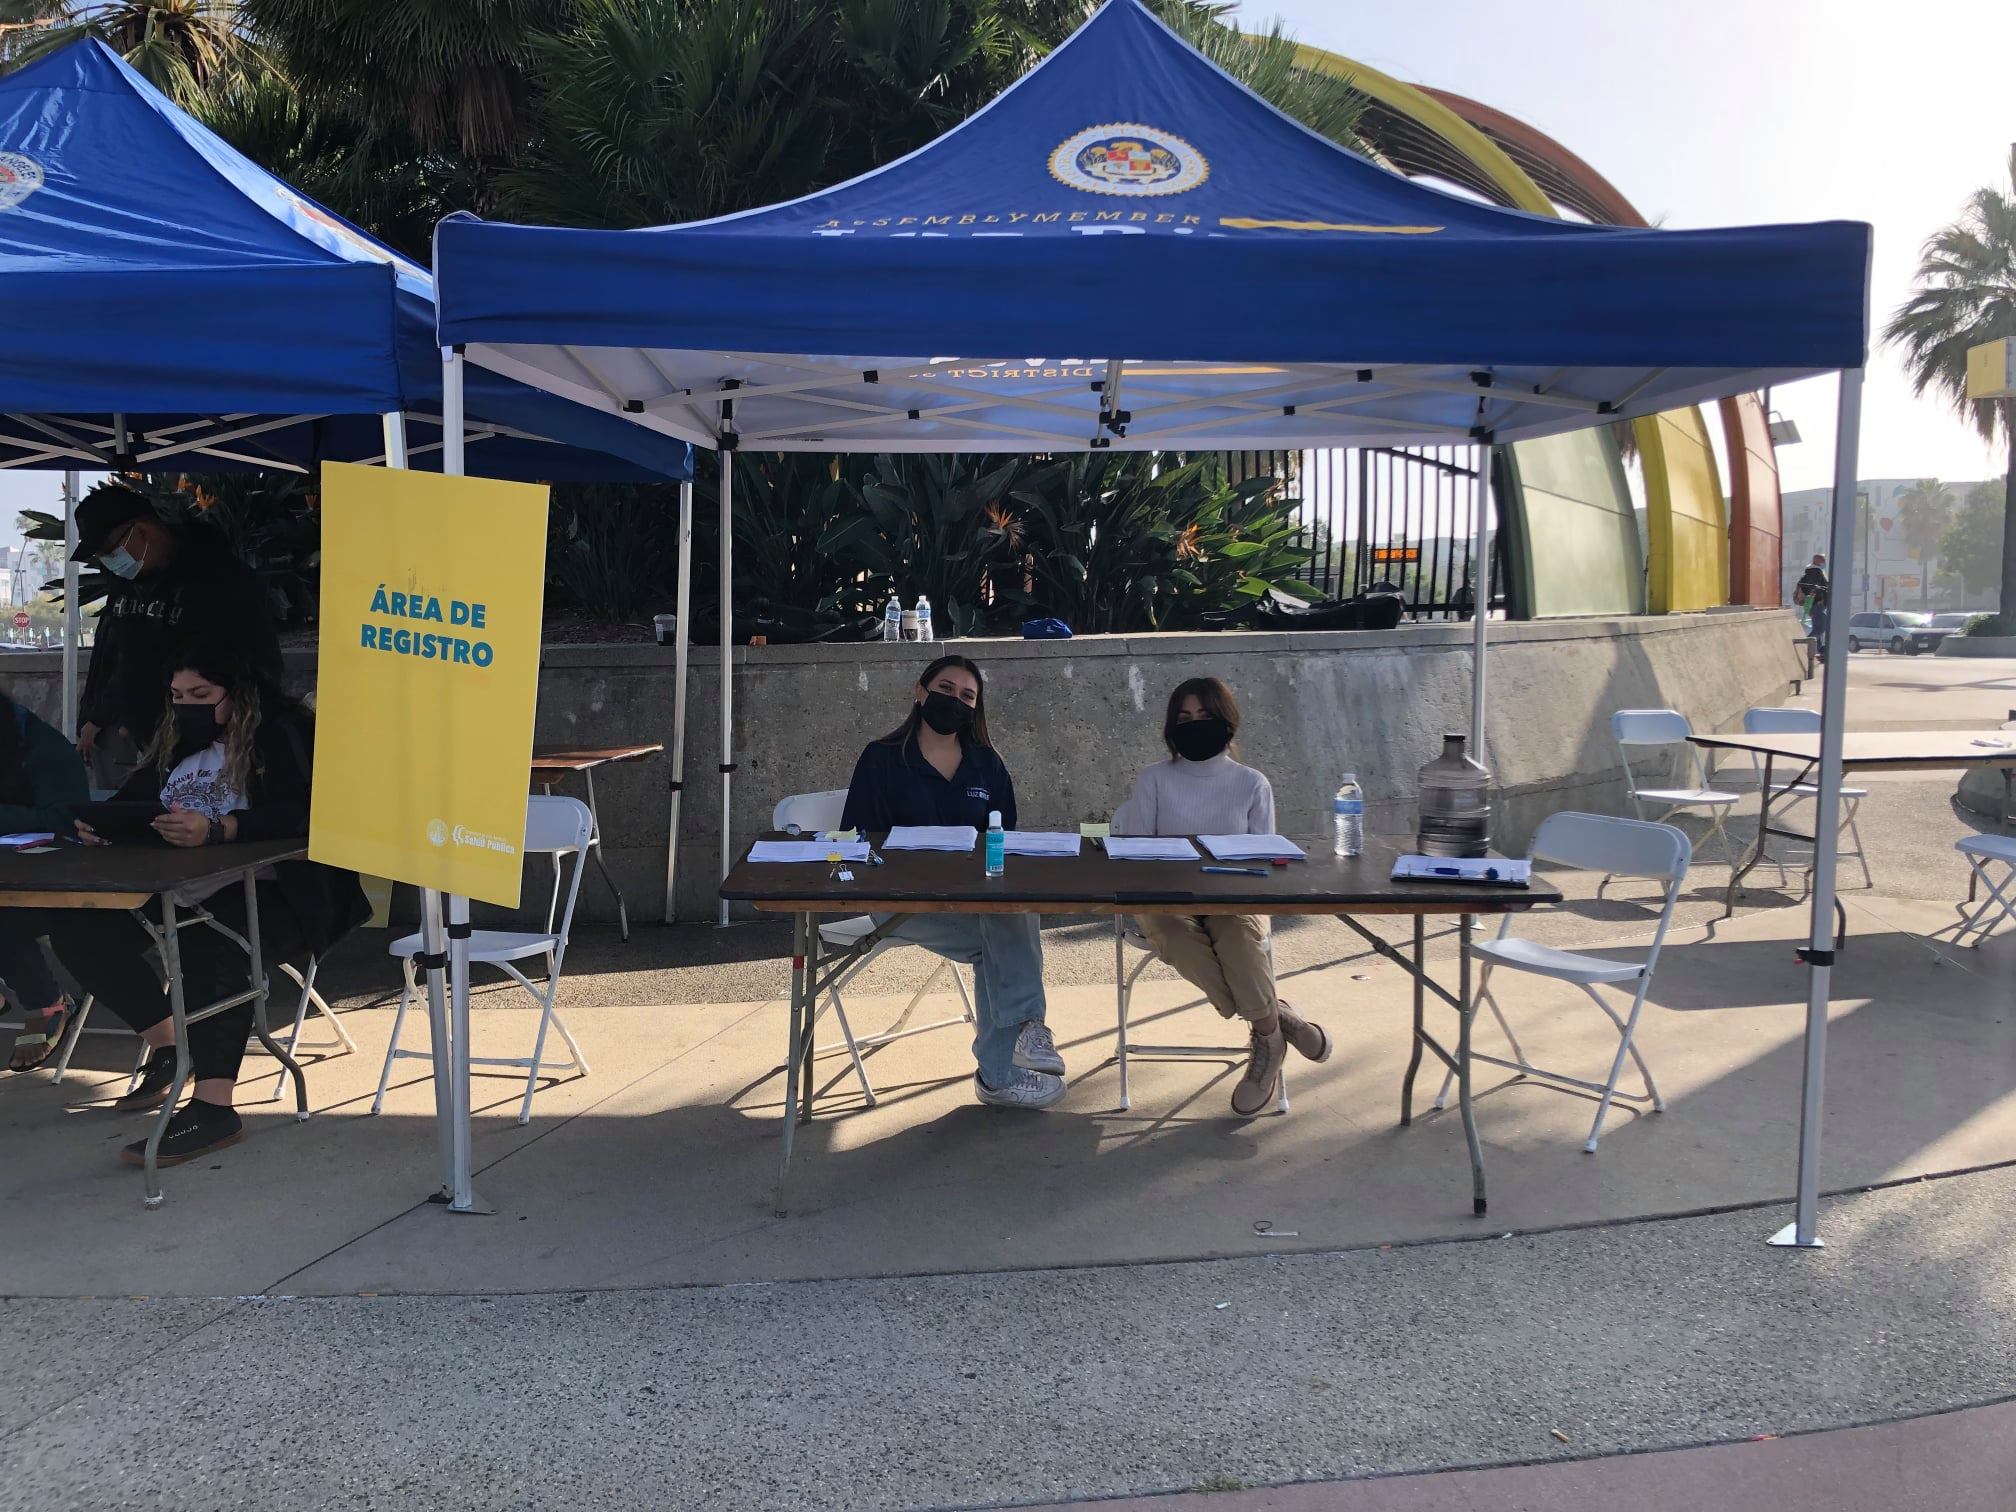 Successful Vaccine Pop-Up in North Hollywood